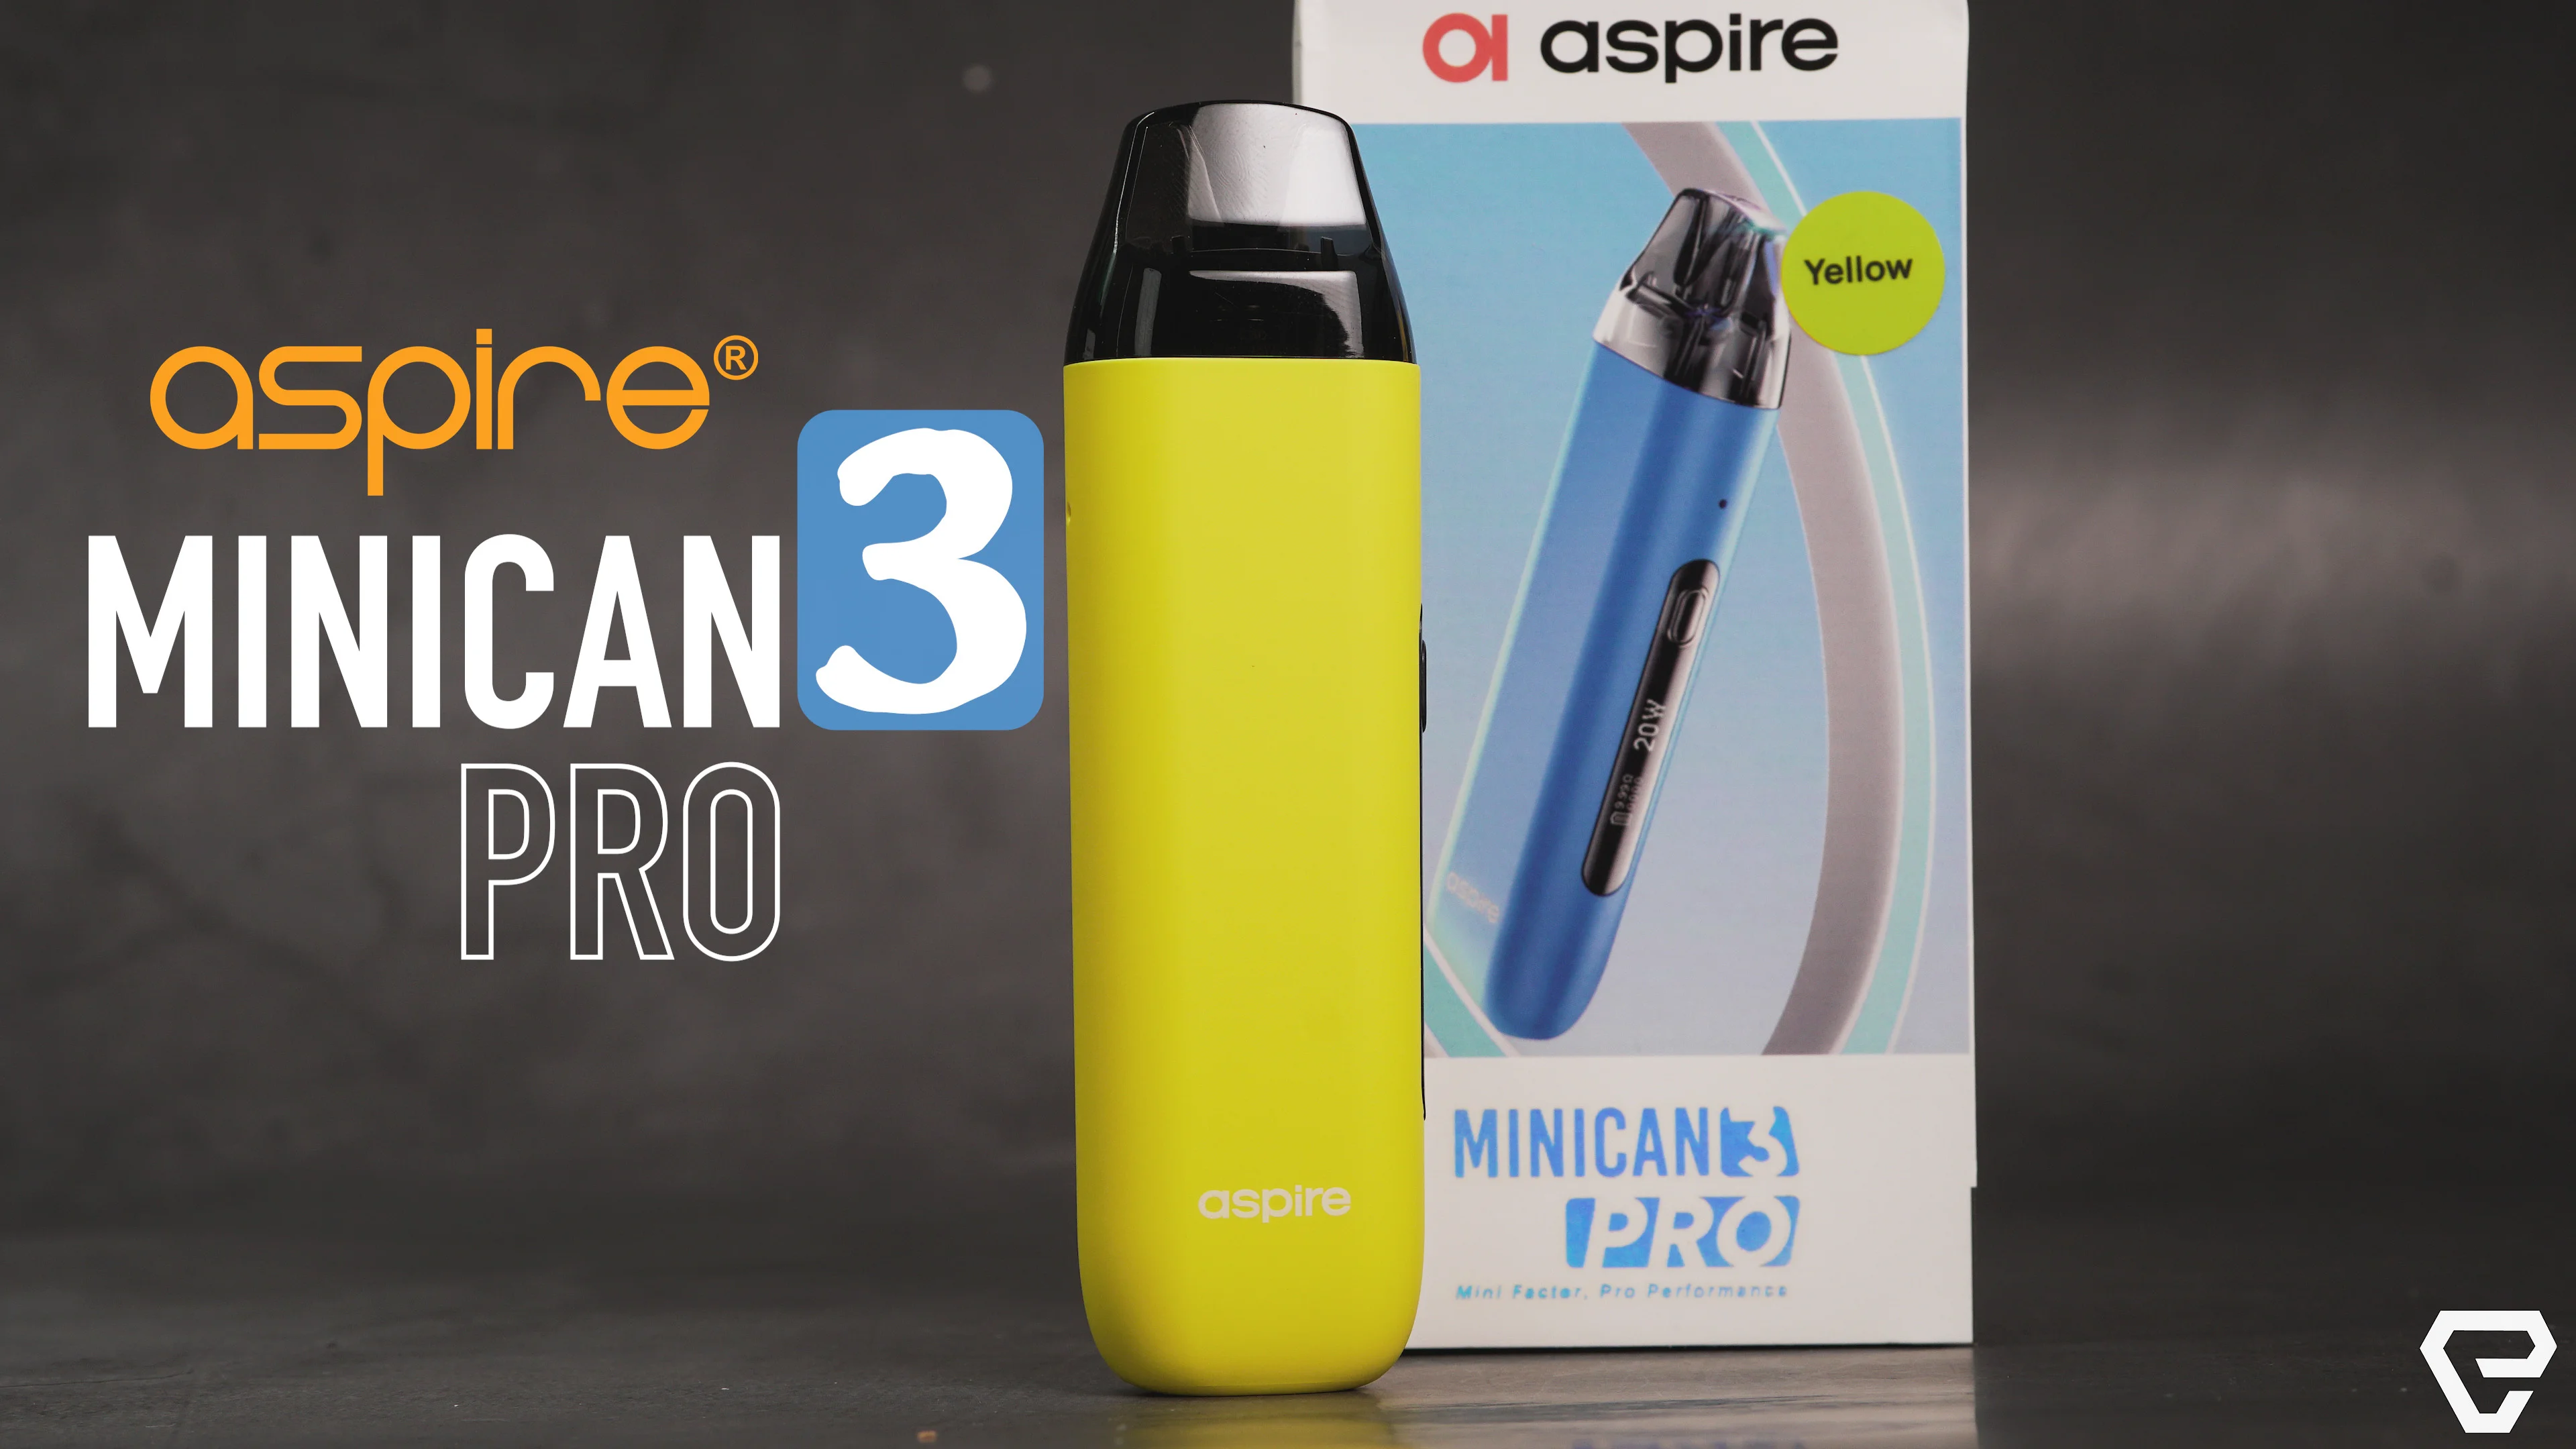 Aspire Minican 3 Pro Pod System Review! on Vimeo